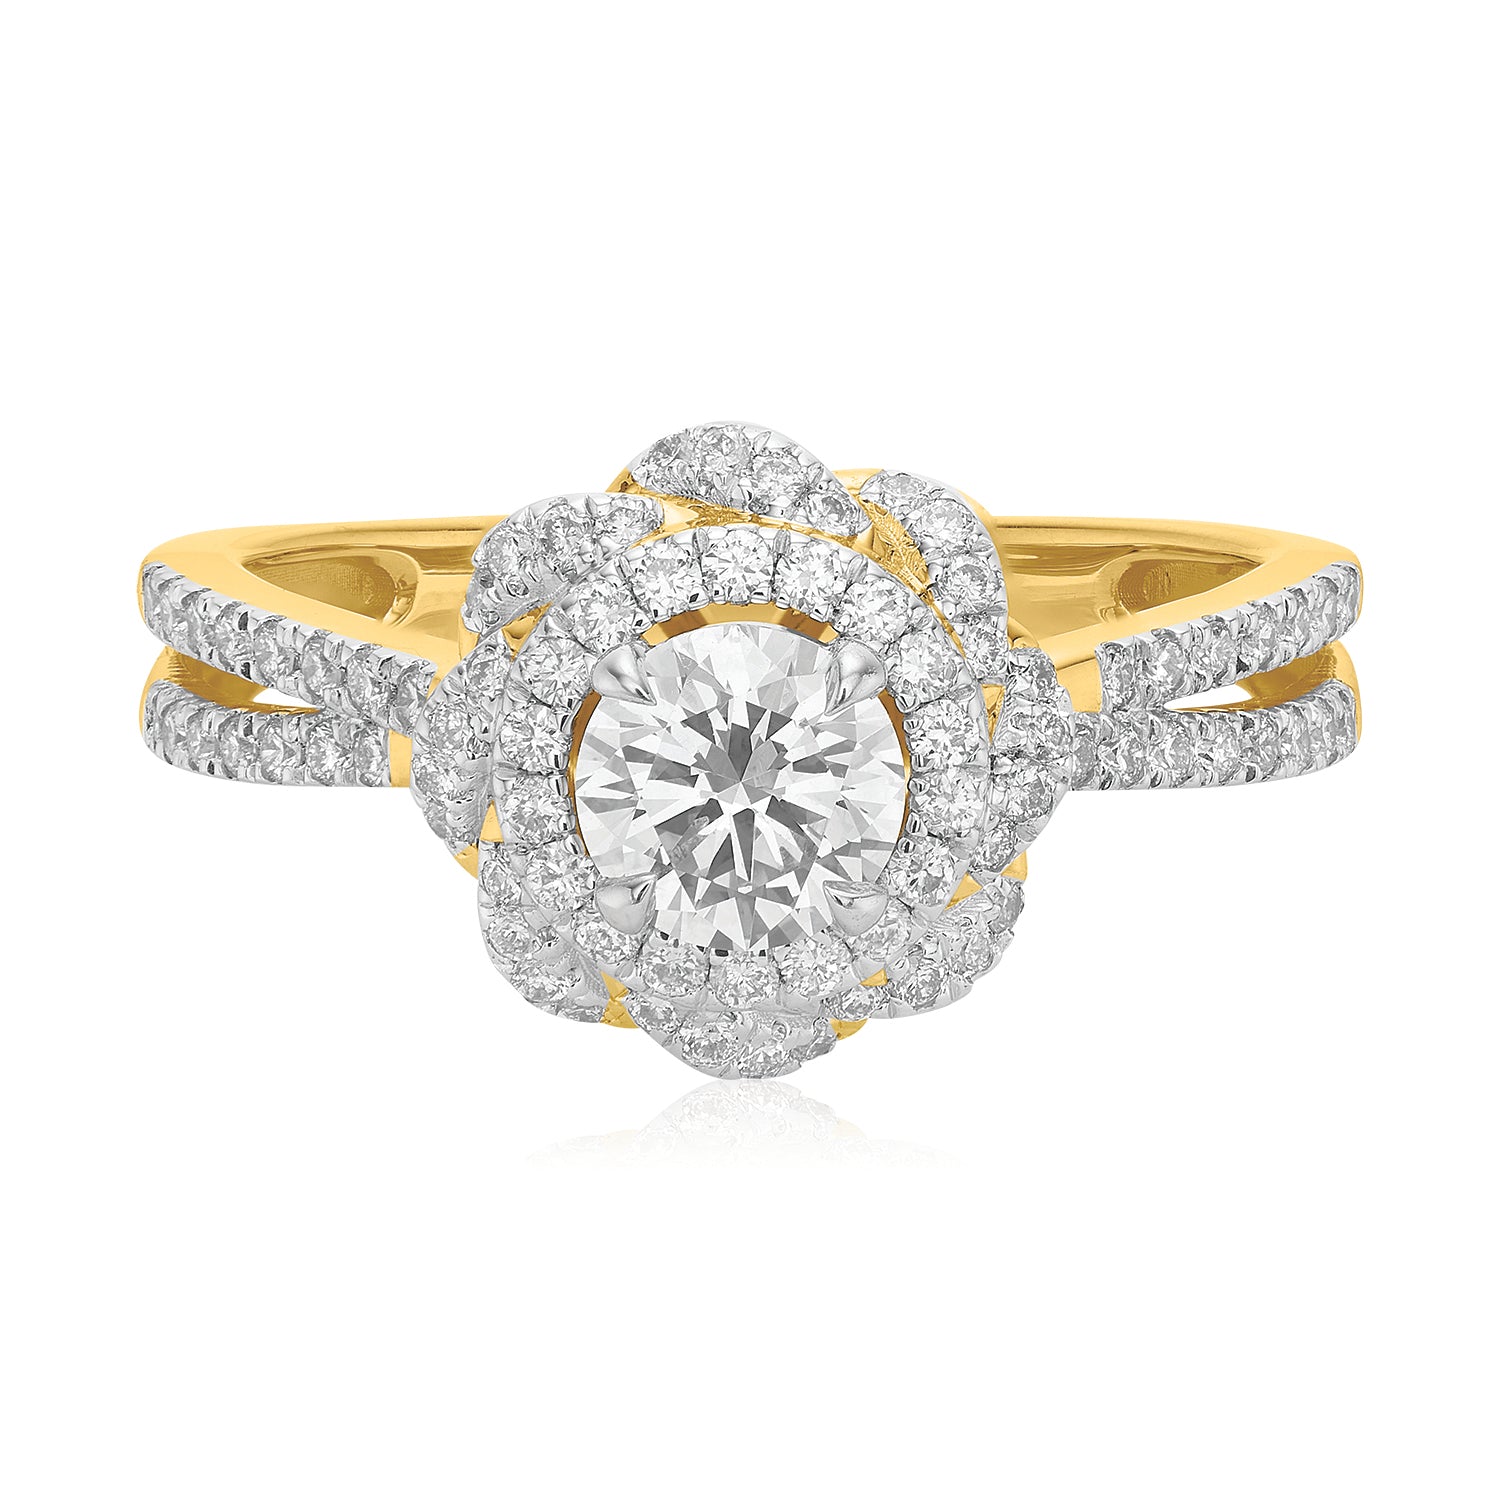 Certified Diamond Engagement Ring | Cushion-Cut Diamond in 18ct. Rose Gold  | 11-1400-8954